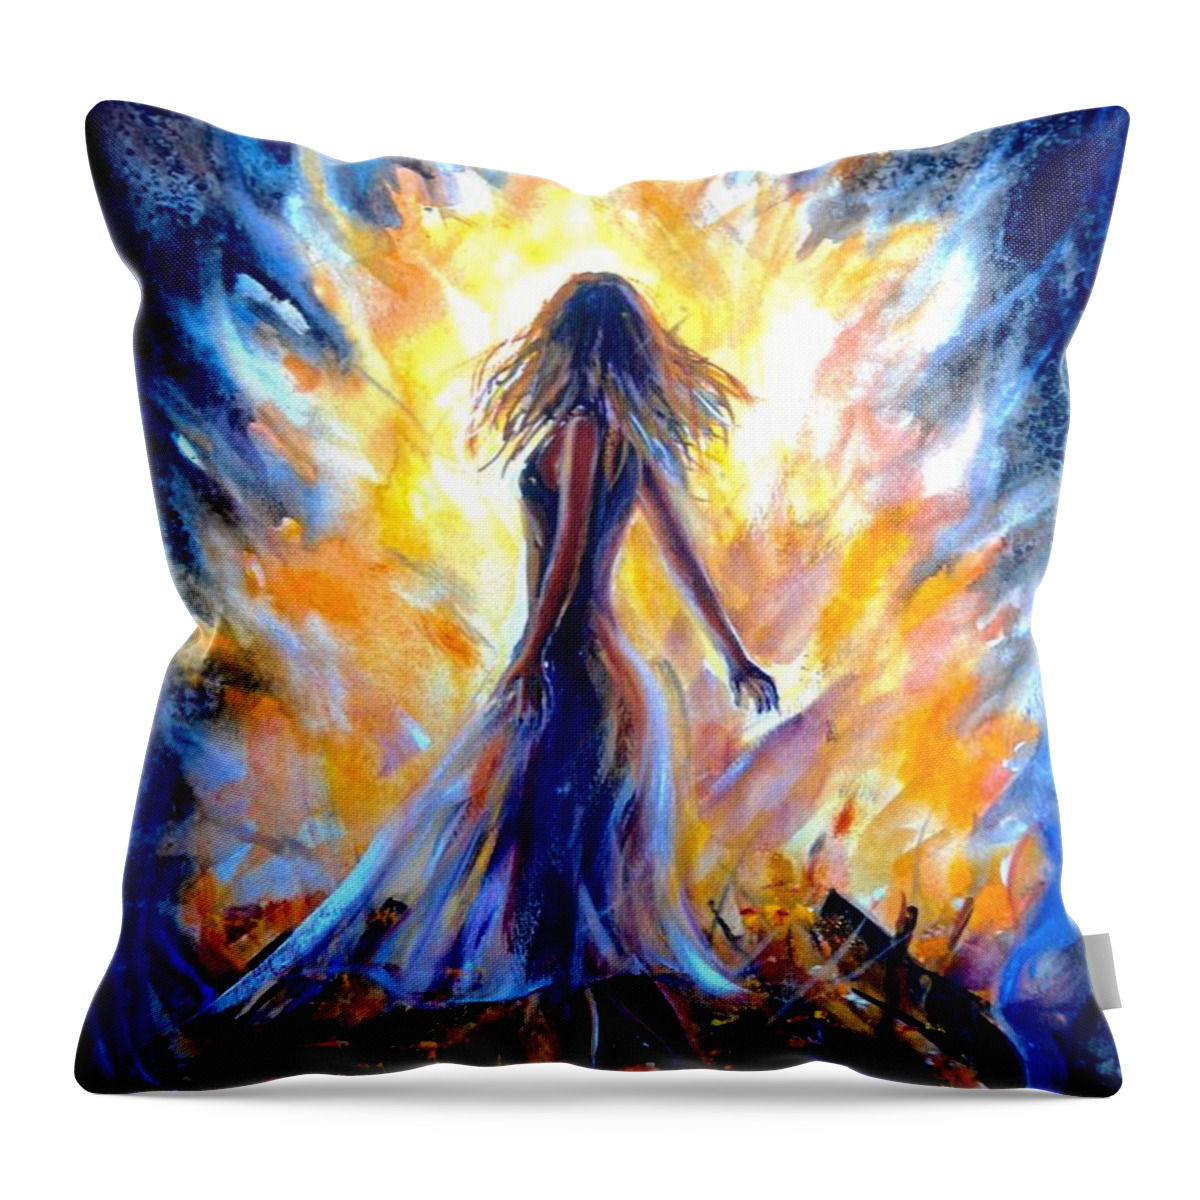 Fire Throw Pillow featuring the painting Fire dance by Katerina Kovatcheva